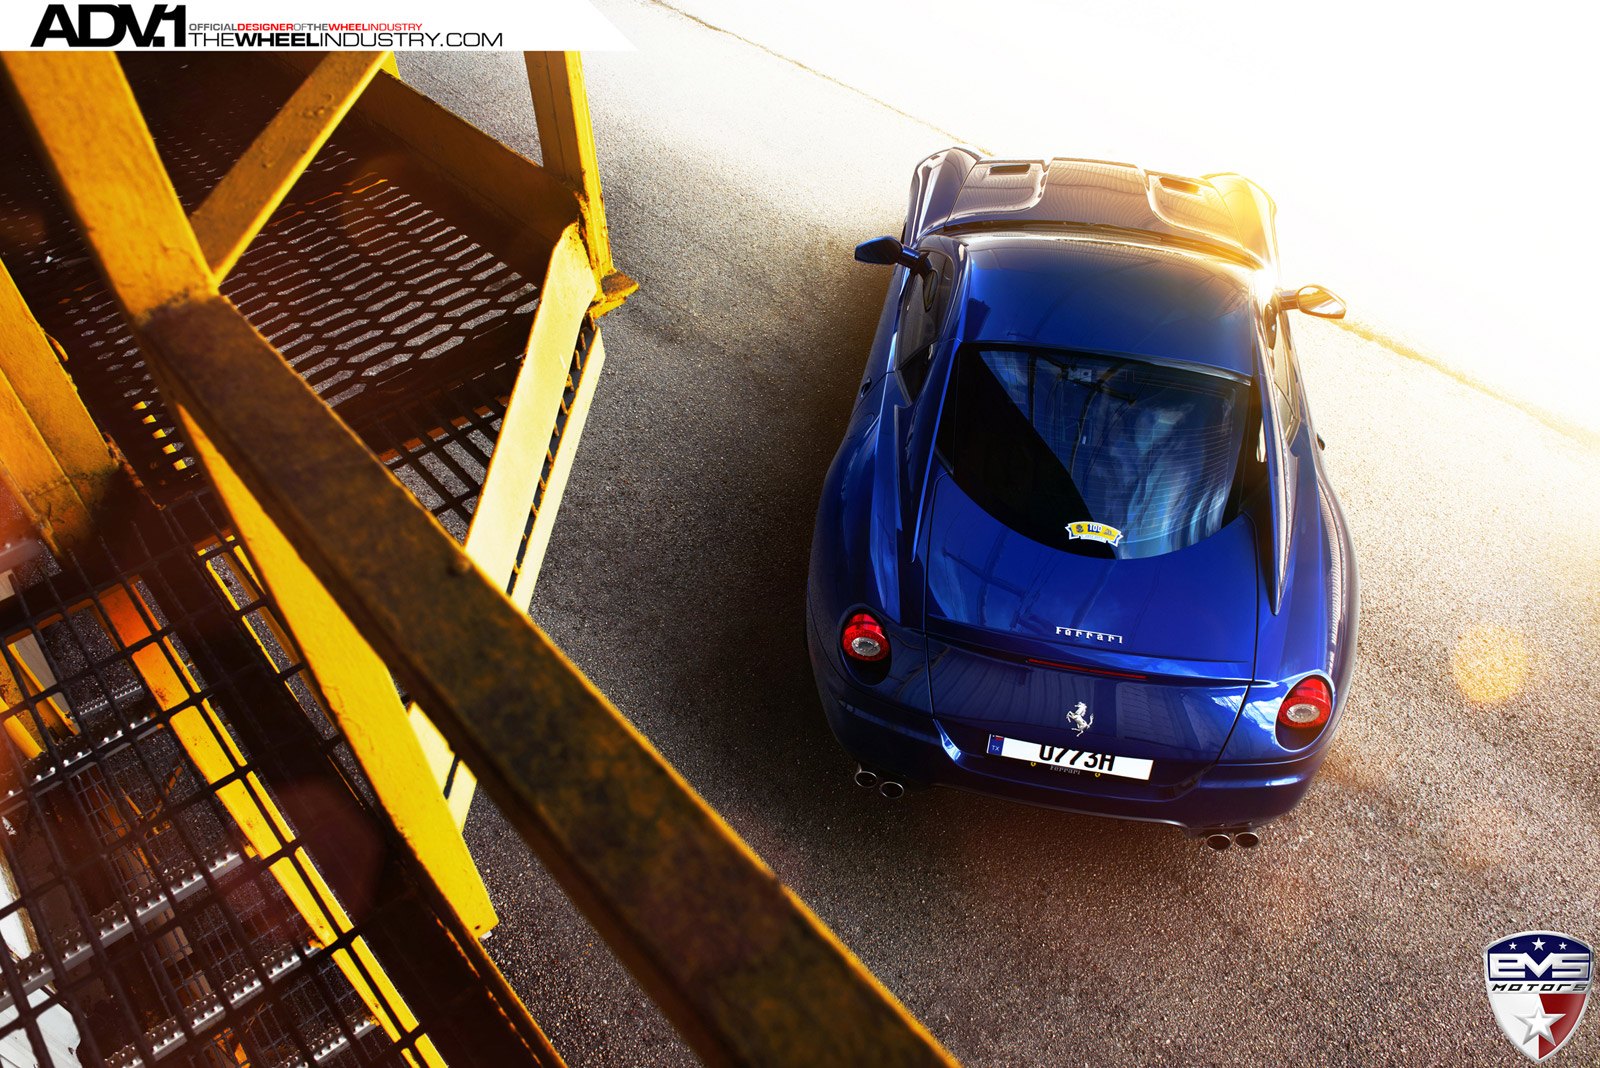 Aftermarket Exhaust System on Blue Ferrari 599 - Photo by ADV.1